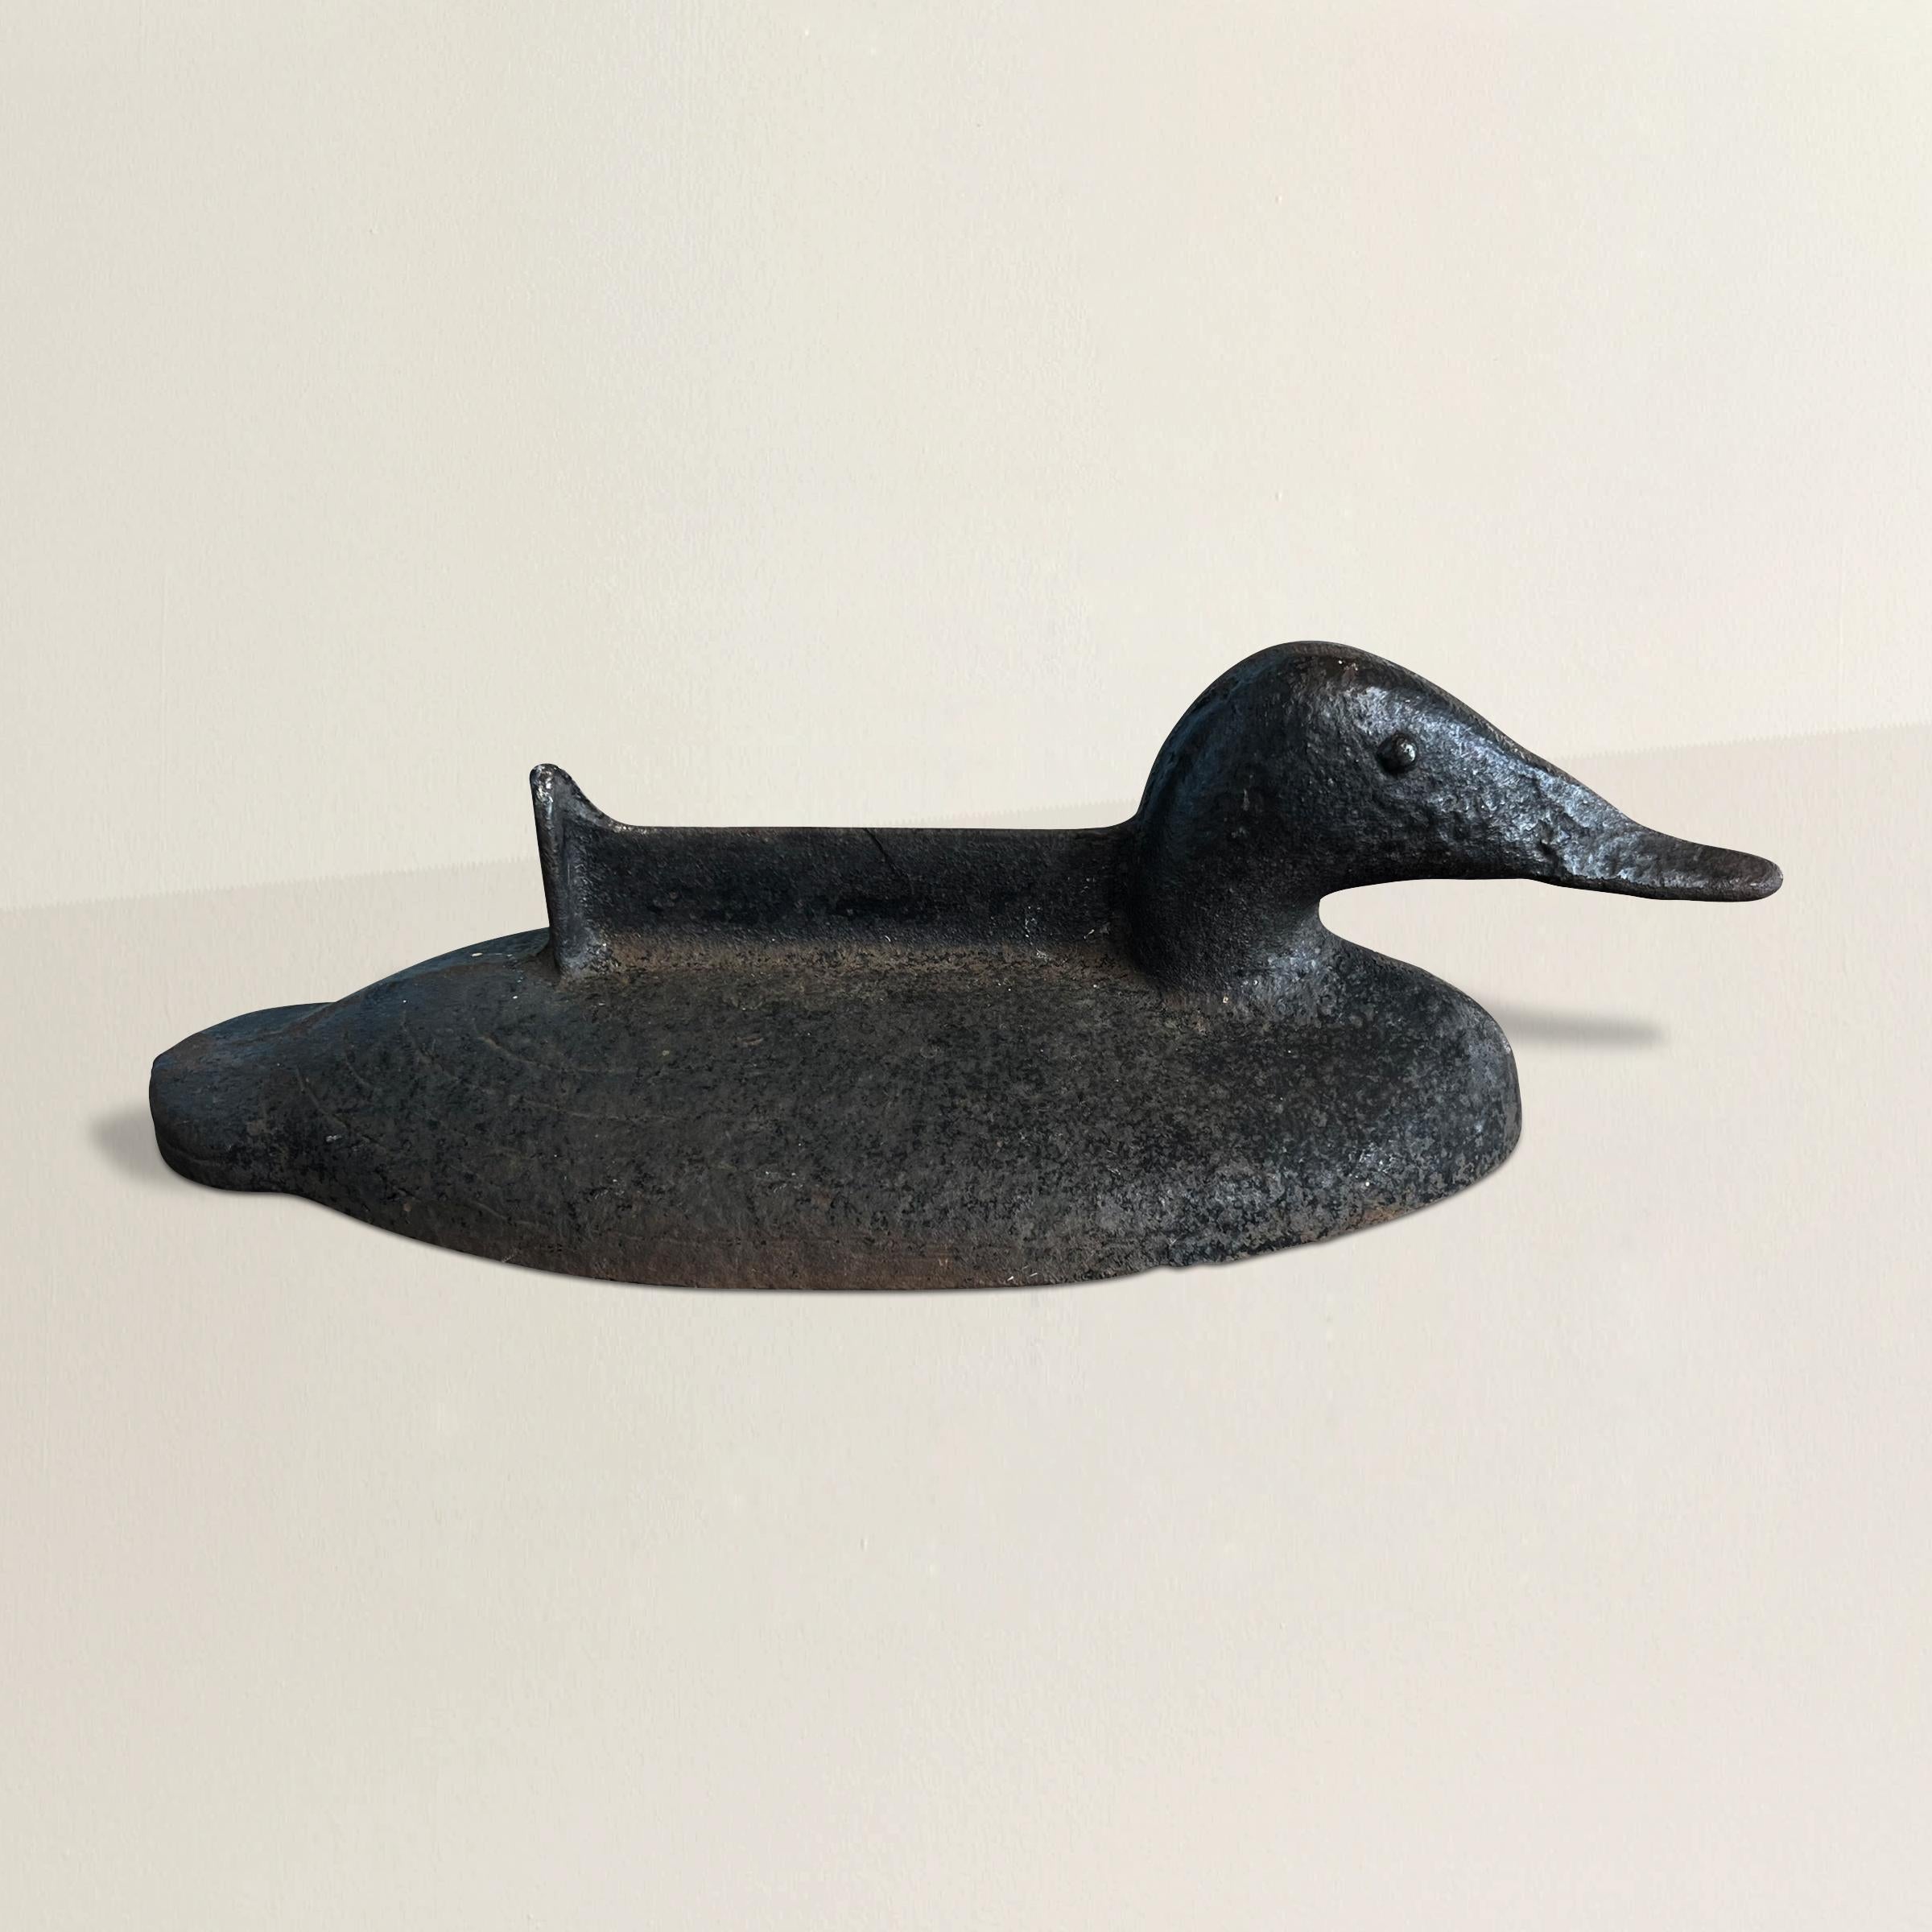 This early 20th-century American solid cast iron mallard duck boot scrape is a multifunctional piece that encapsulates both practicality and rustic charm. Initially designed as a boot scrape, this heavy and durable duck-shaped ornament was